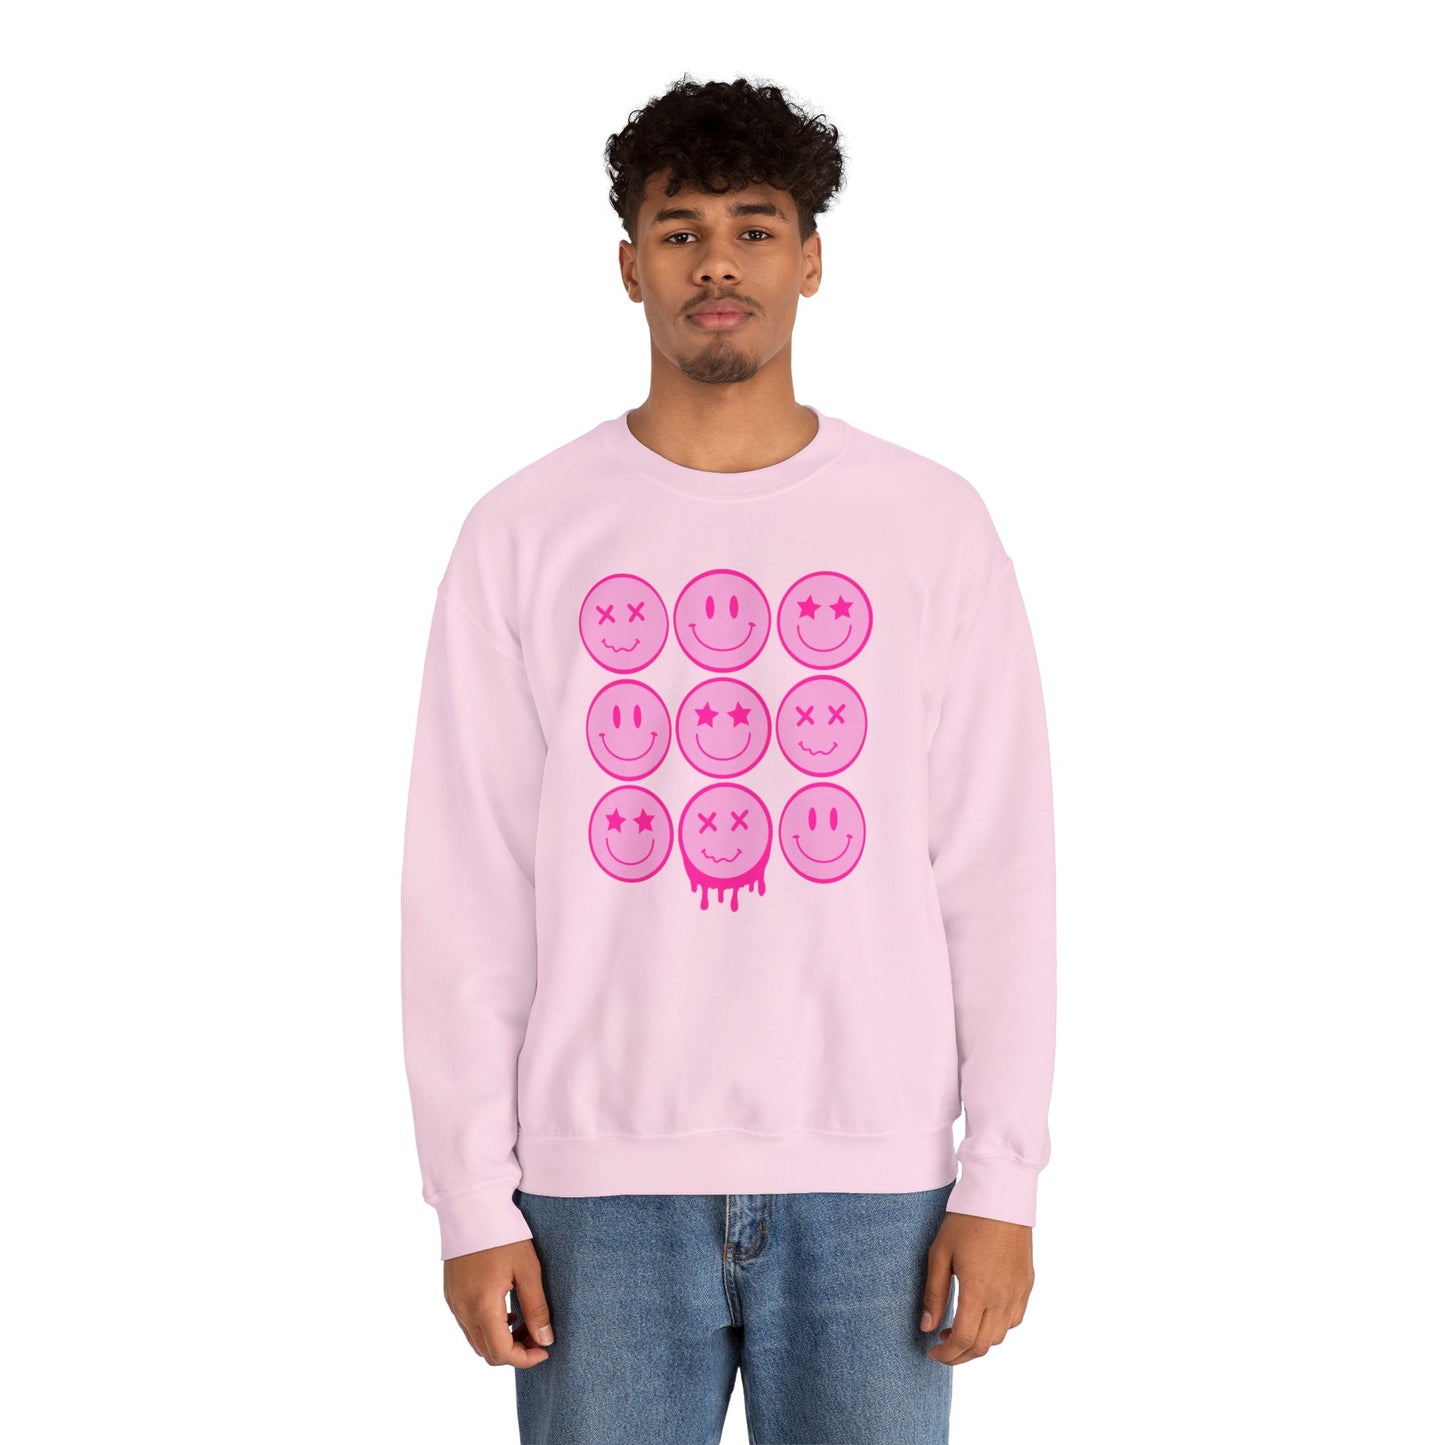 Smiley Sweater Pink